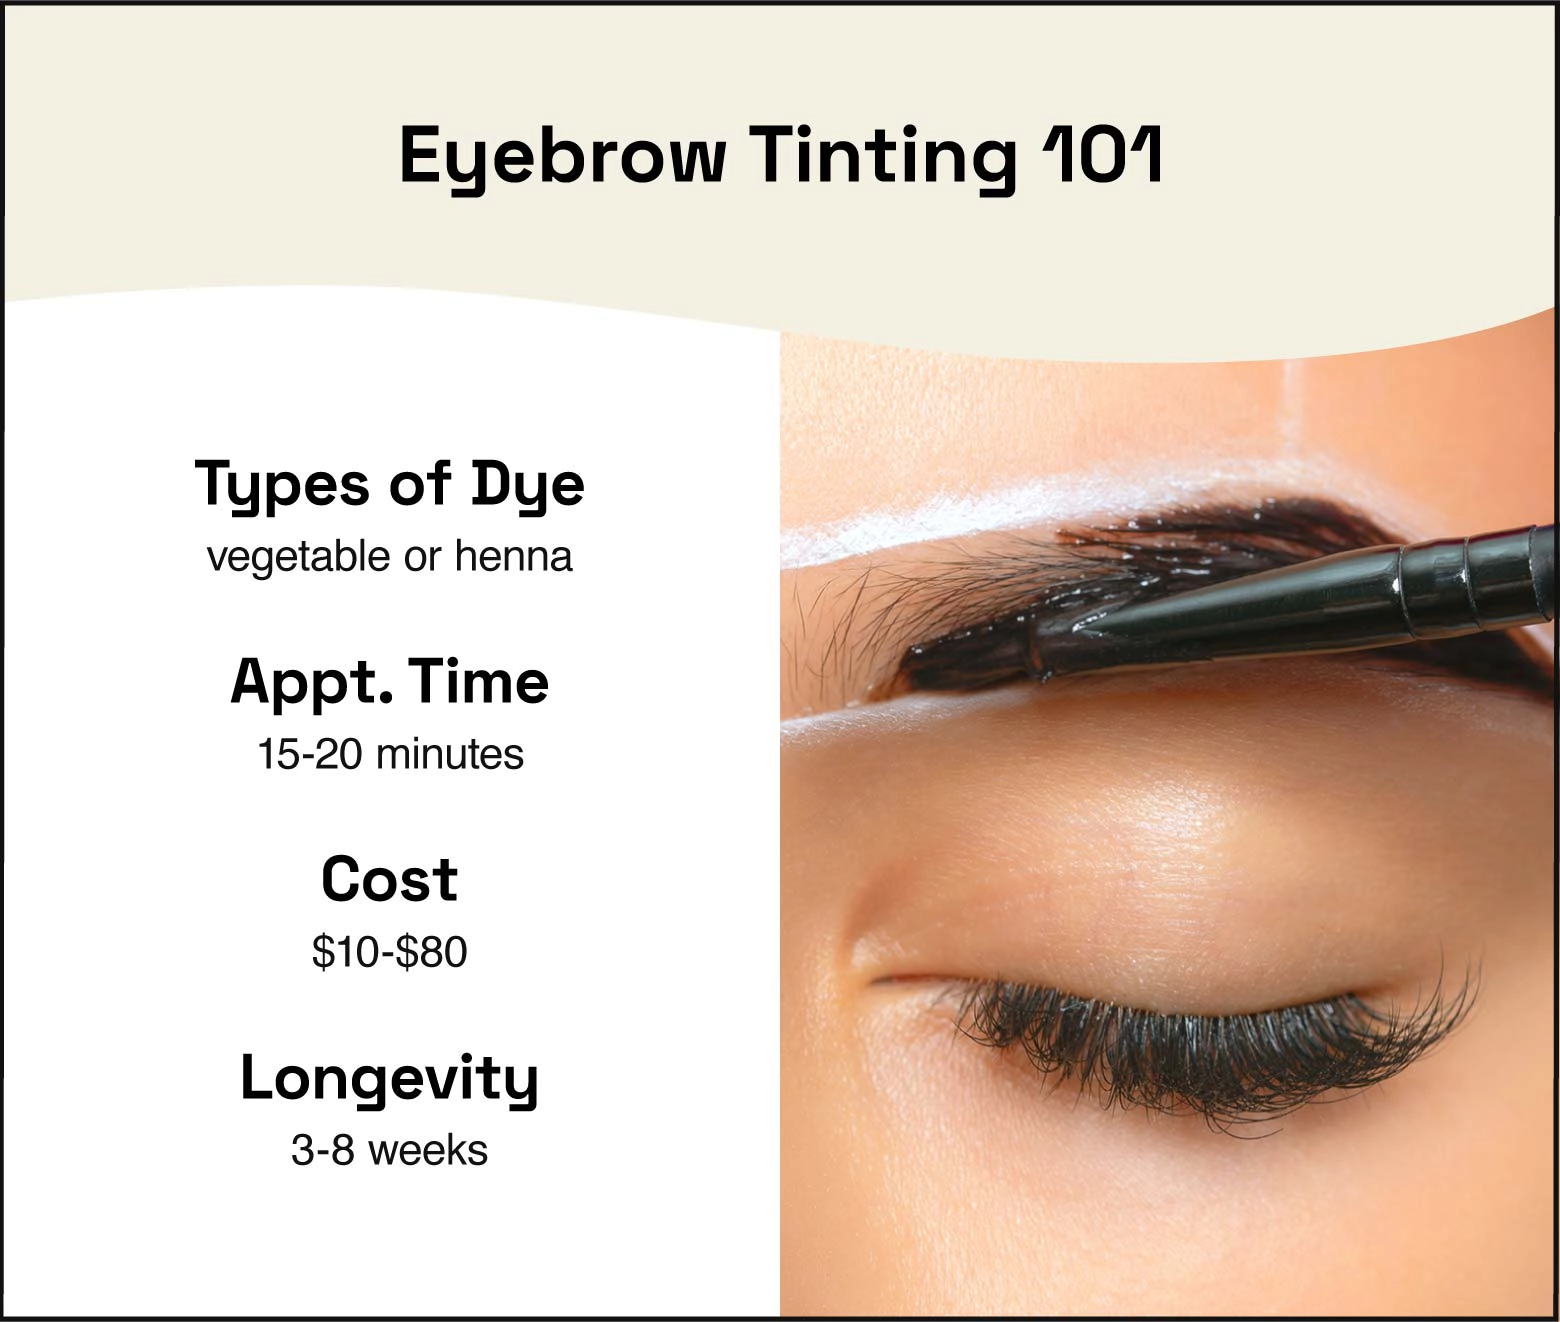 You can get an eyebrow tint with vegetable- or henna-based dye. The appointment takes 15 to 20 minutes, costs $10 to $80, and lasts three to eight weeks.